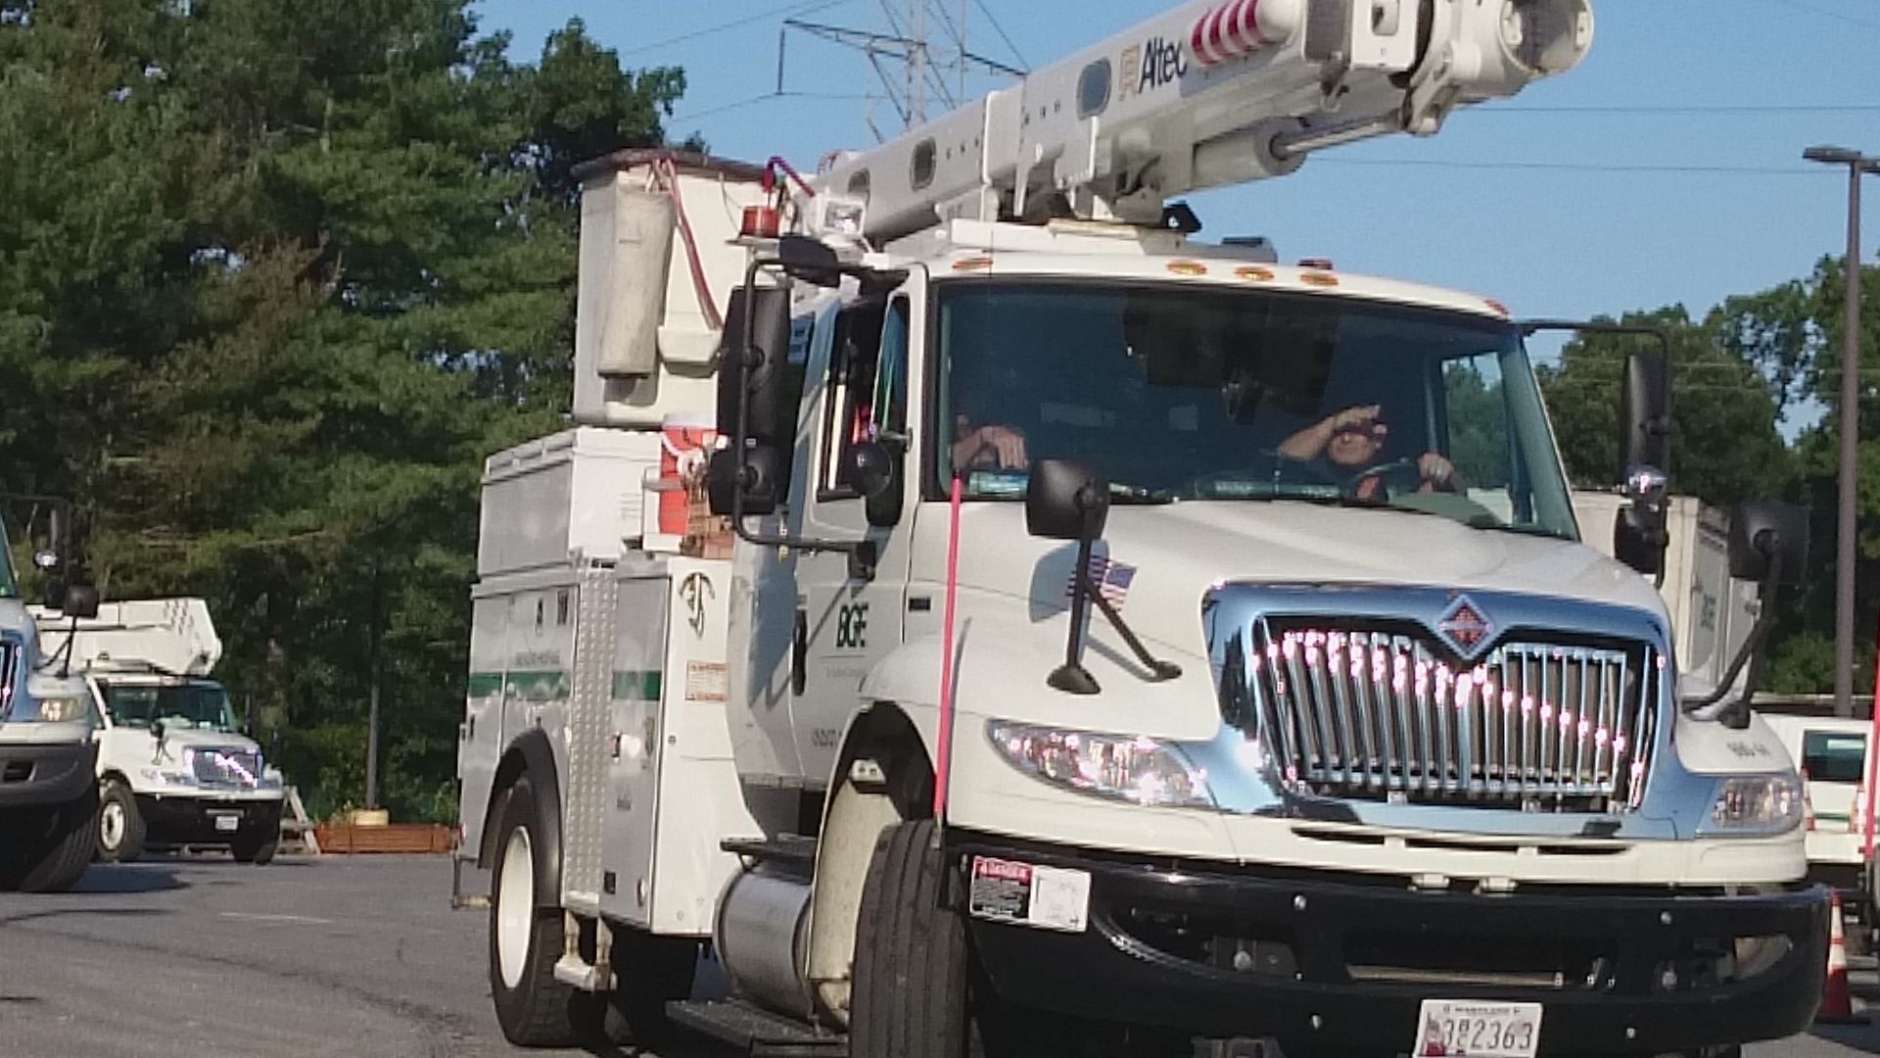 Hundreds of power crews from the D.C. metropolitan area are heading down to Florida, Georgia and wherever else they are needed to help with clean up from Hurricane Irma. (WTOP/Dennis Foley)